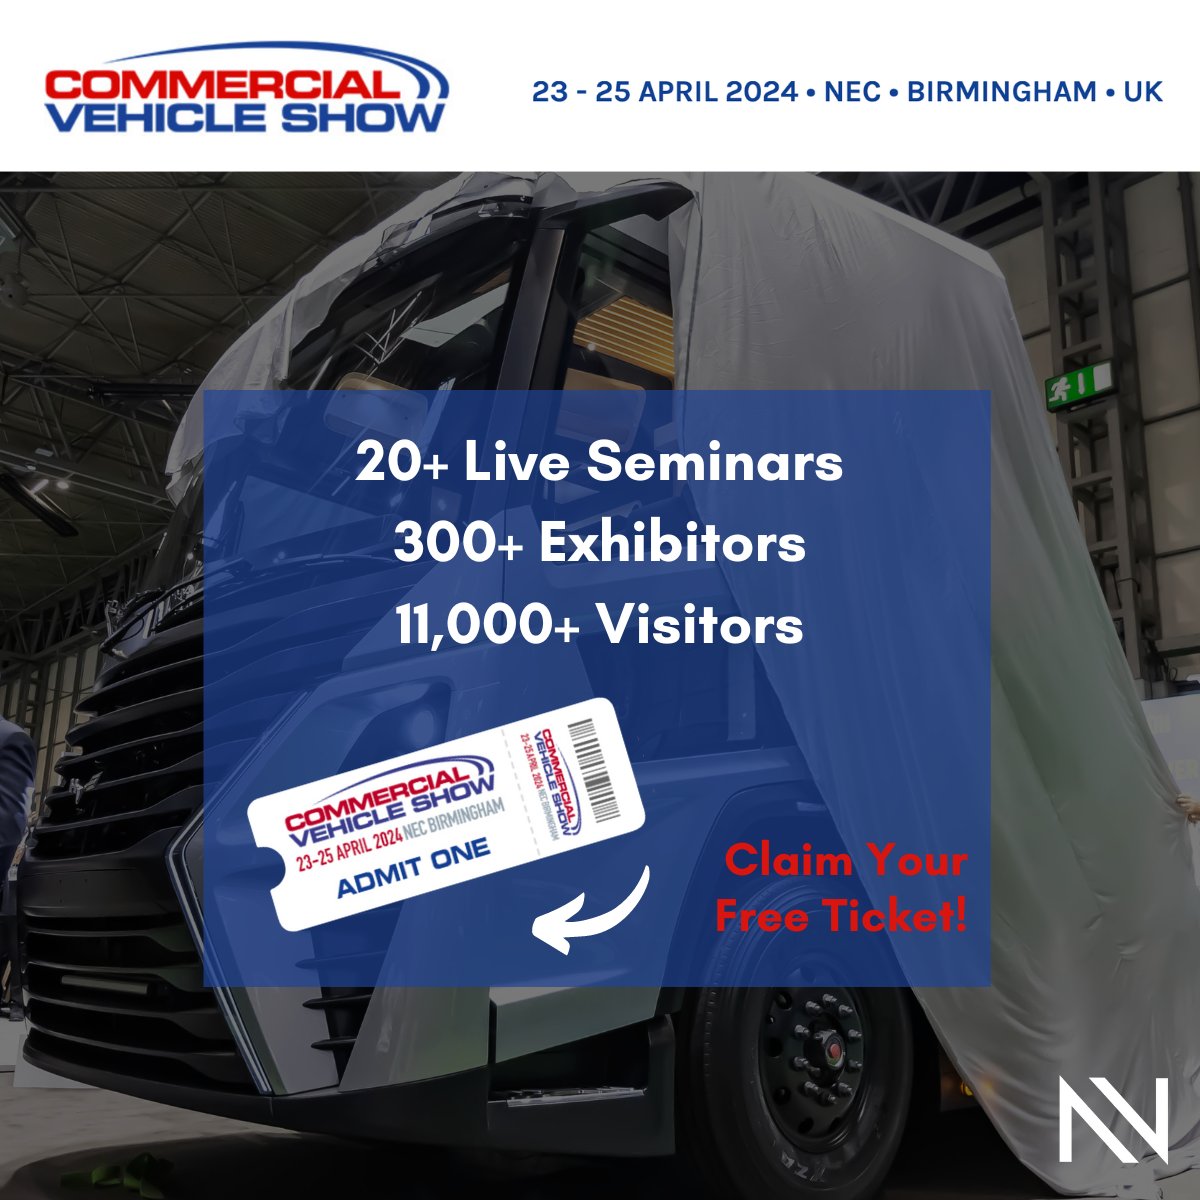 🌟 The Convey team is on the road again later this week for the 2024 @TheCVShow with a new seminar programme alongside the exhibition. Convey’s Karen Crispe envisages a packed couple of days of networking.➡ Click on the link below for your FREE ticket! bit.ly/4aBNqPB